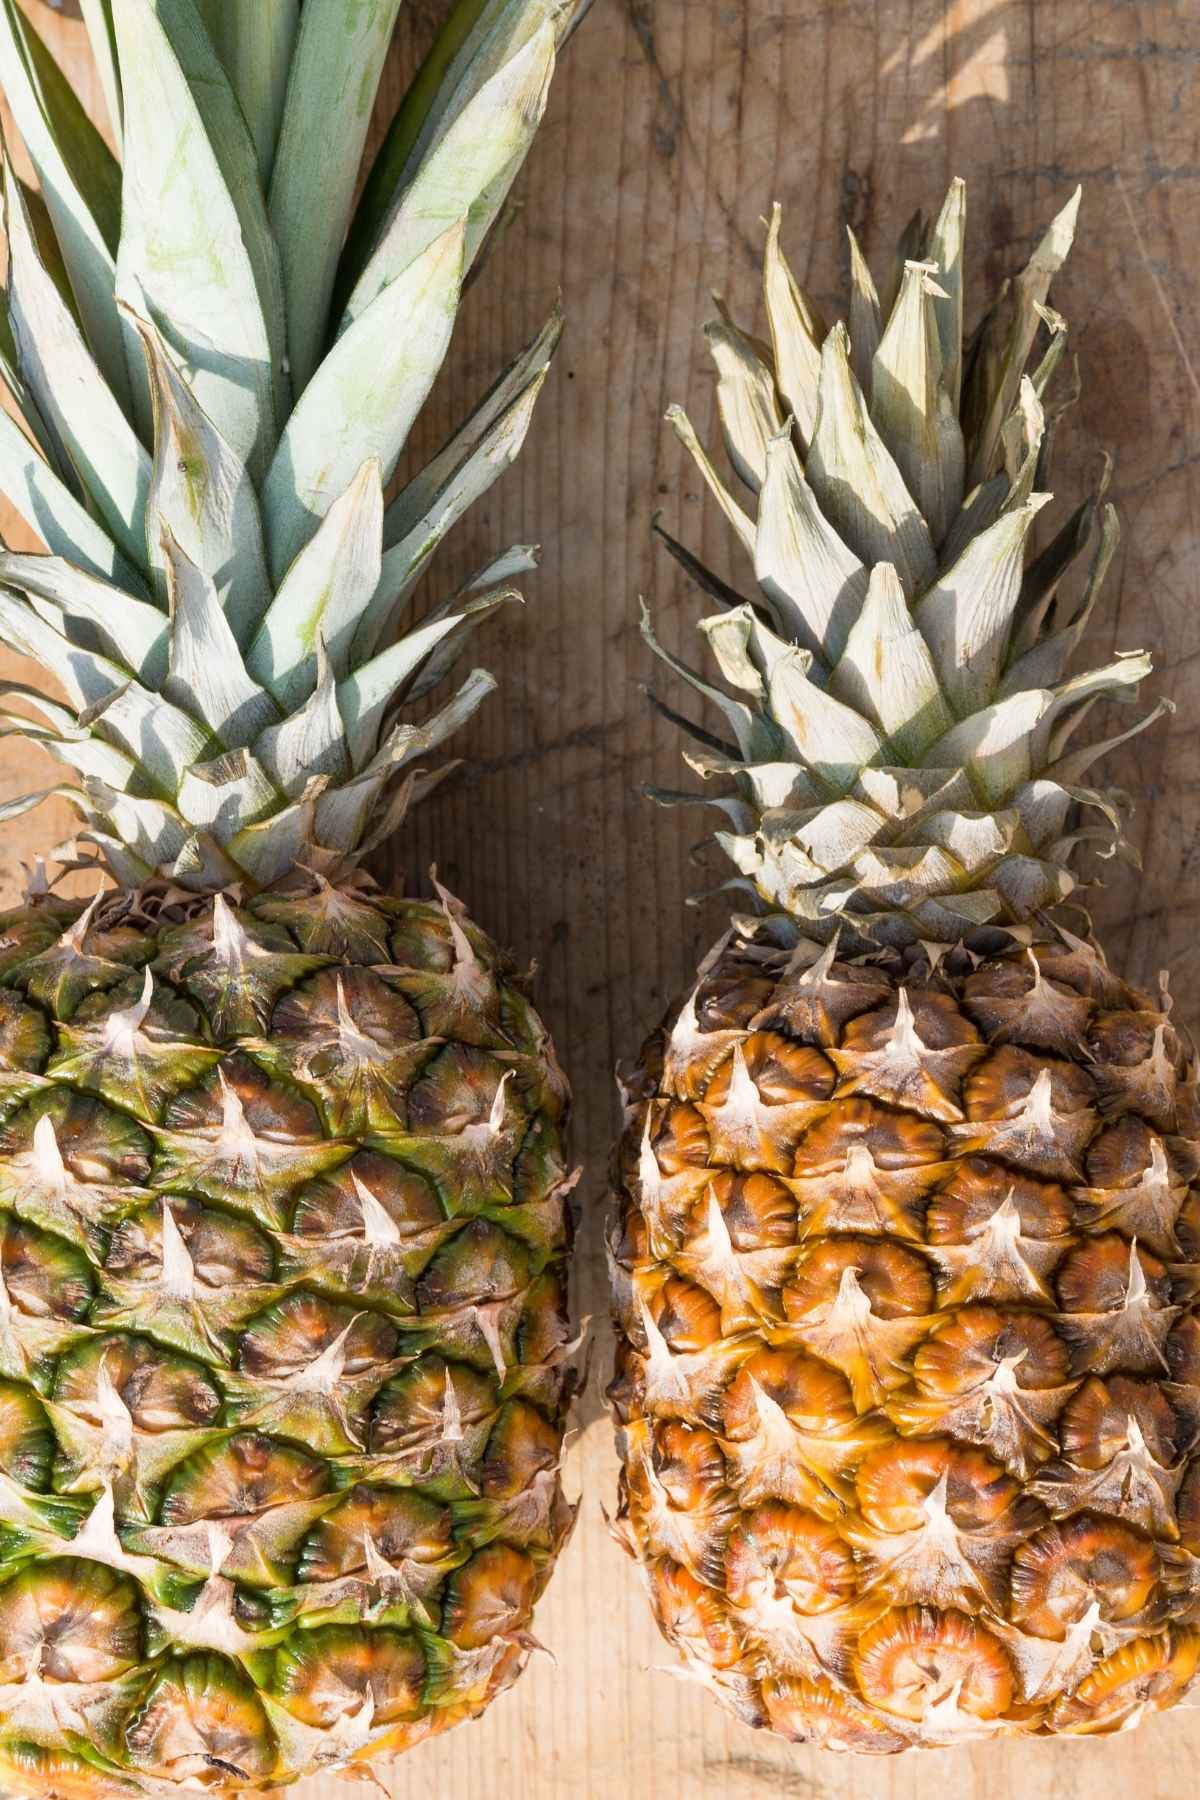 How to Tell if a Pineapple is Ripe (5 Easy Ways How to Ripen a Pineapple)